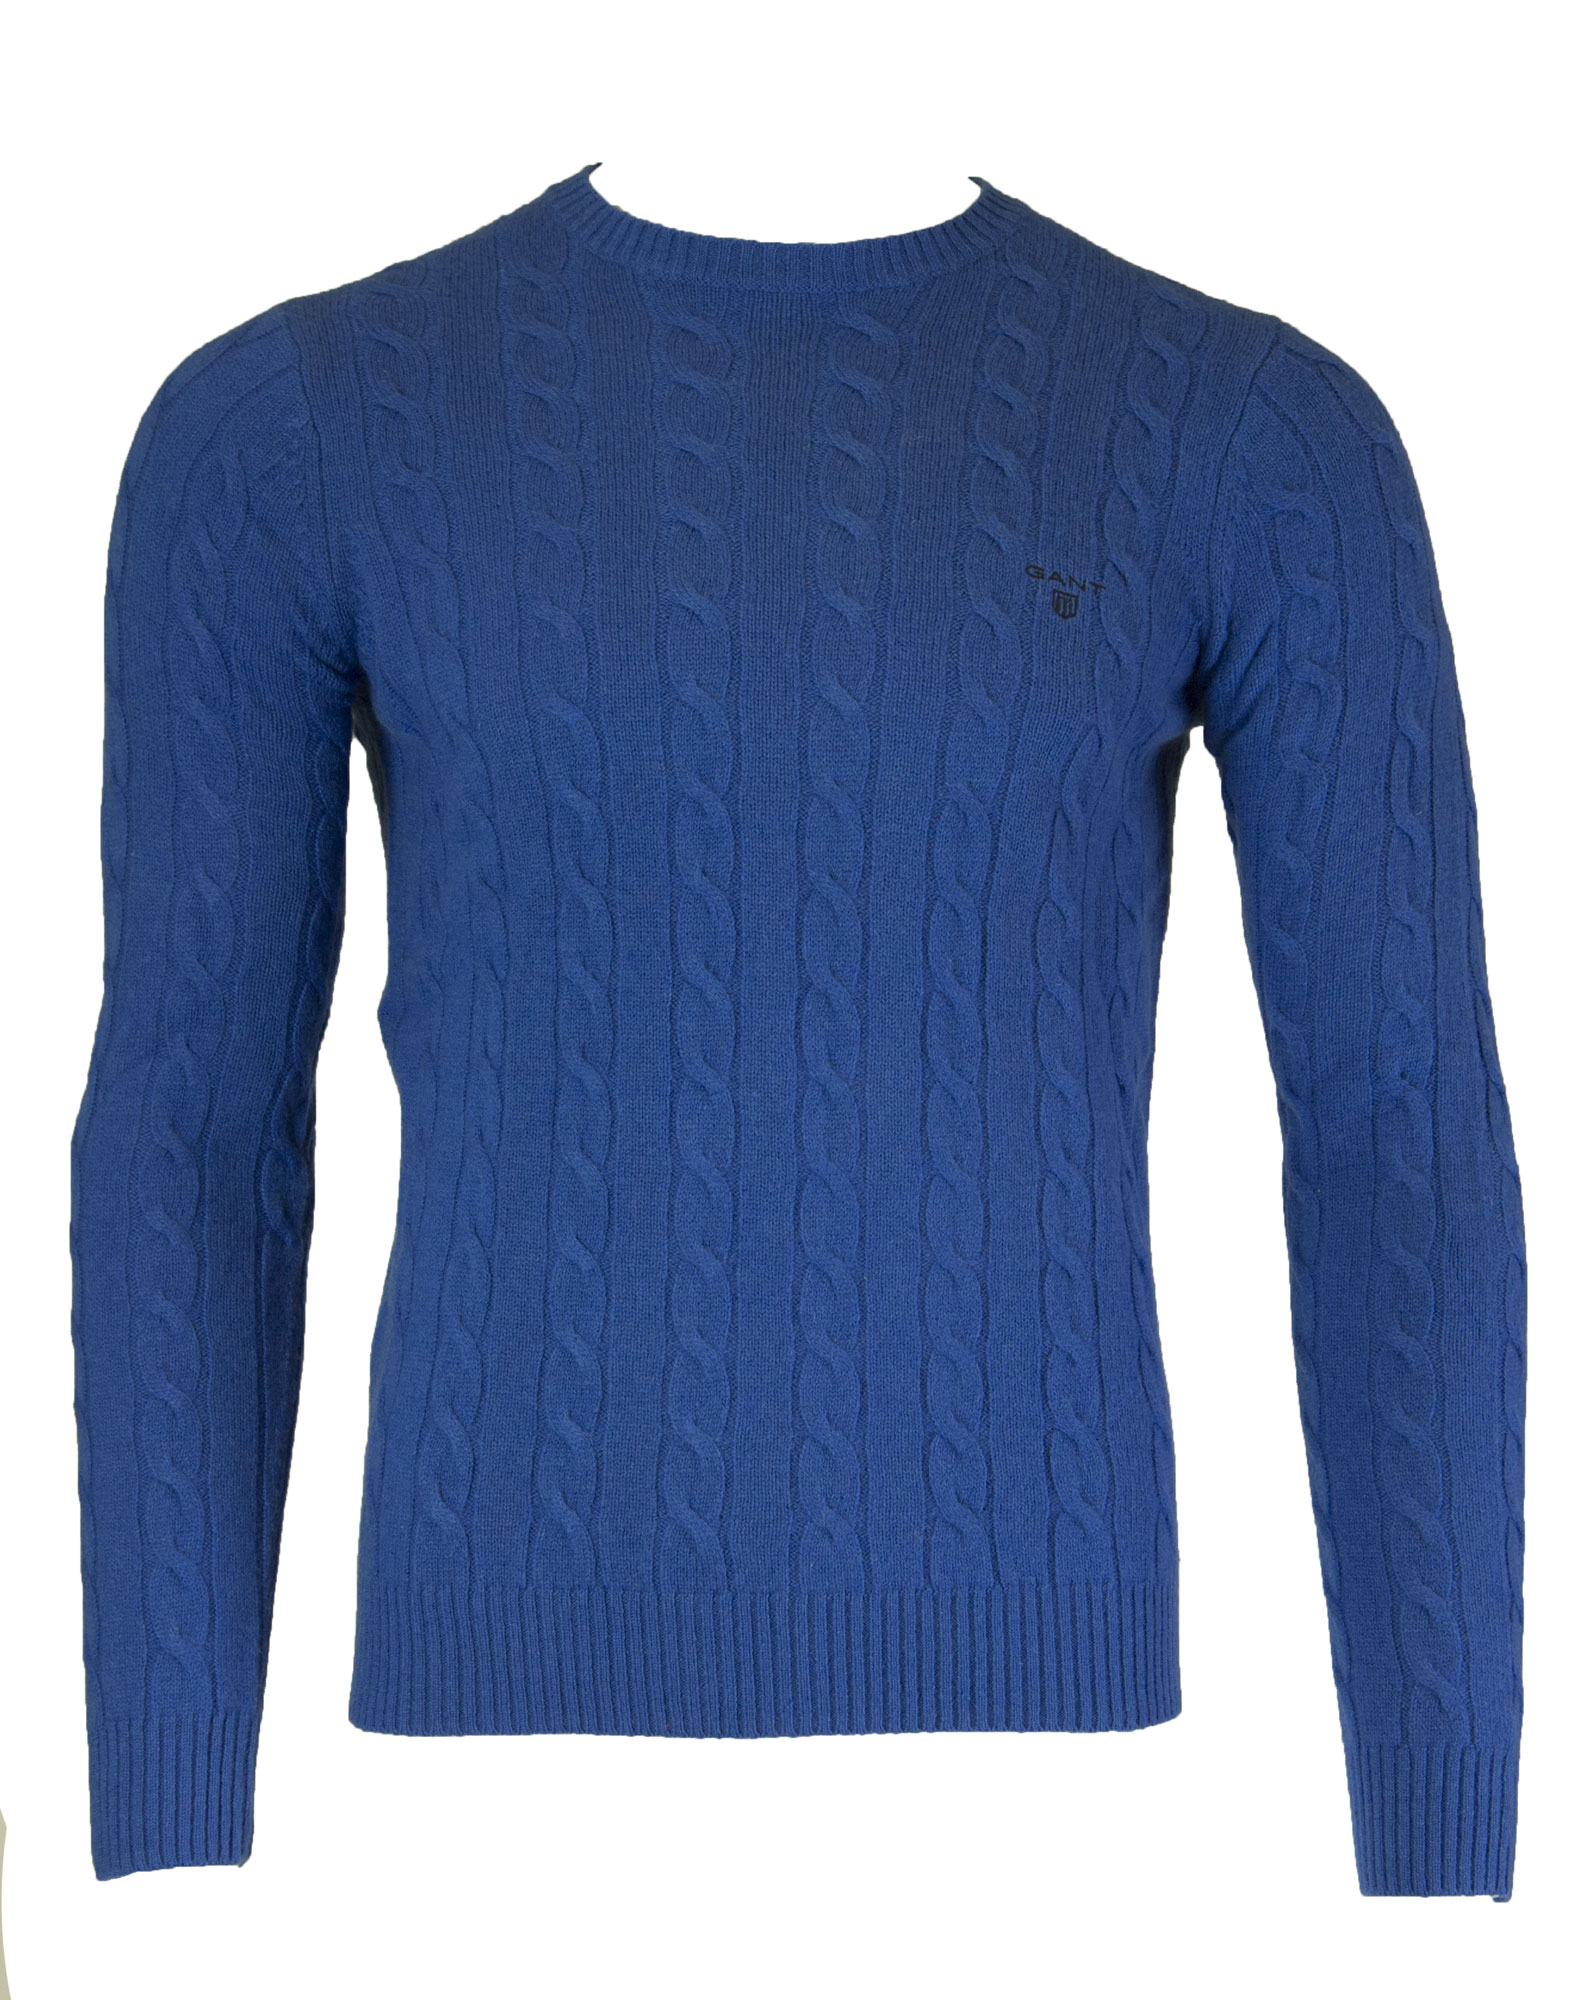 GANT Men's Nautical Blue Lambswool Cable Crew Sweater 80641 Size M $175 ...